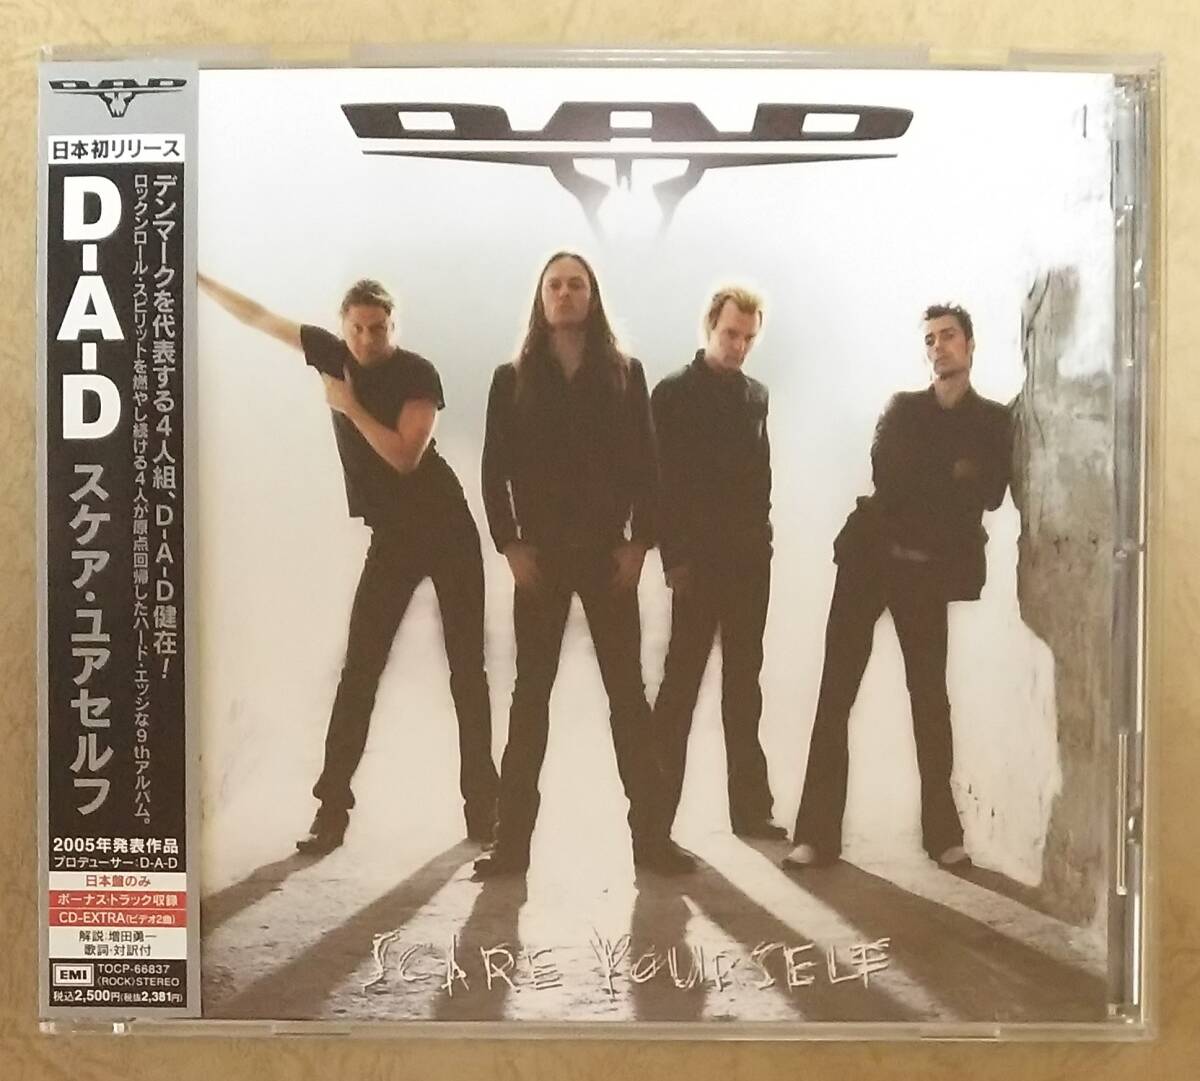 【HM/HR】 ※貴重盤　D.A.D (D-A-D) / スケア・ユアセルフ (SCARE YOURSELF)　帯付　9thアルバム　北欧メタル/ロックンロール　※DAD_画像1